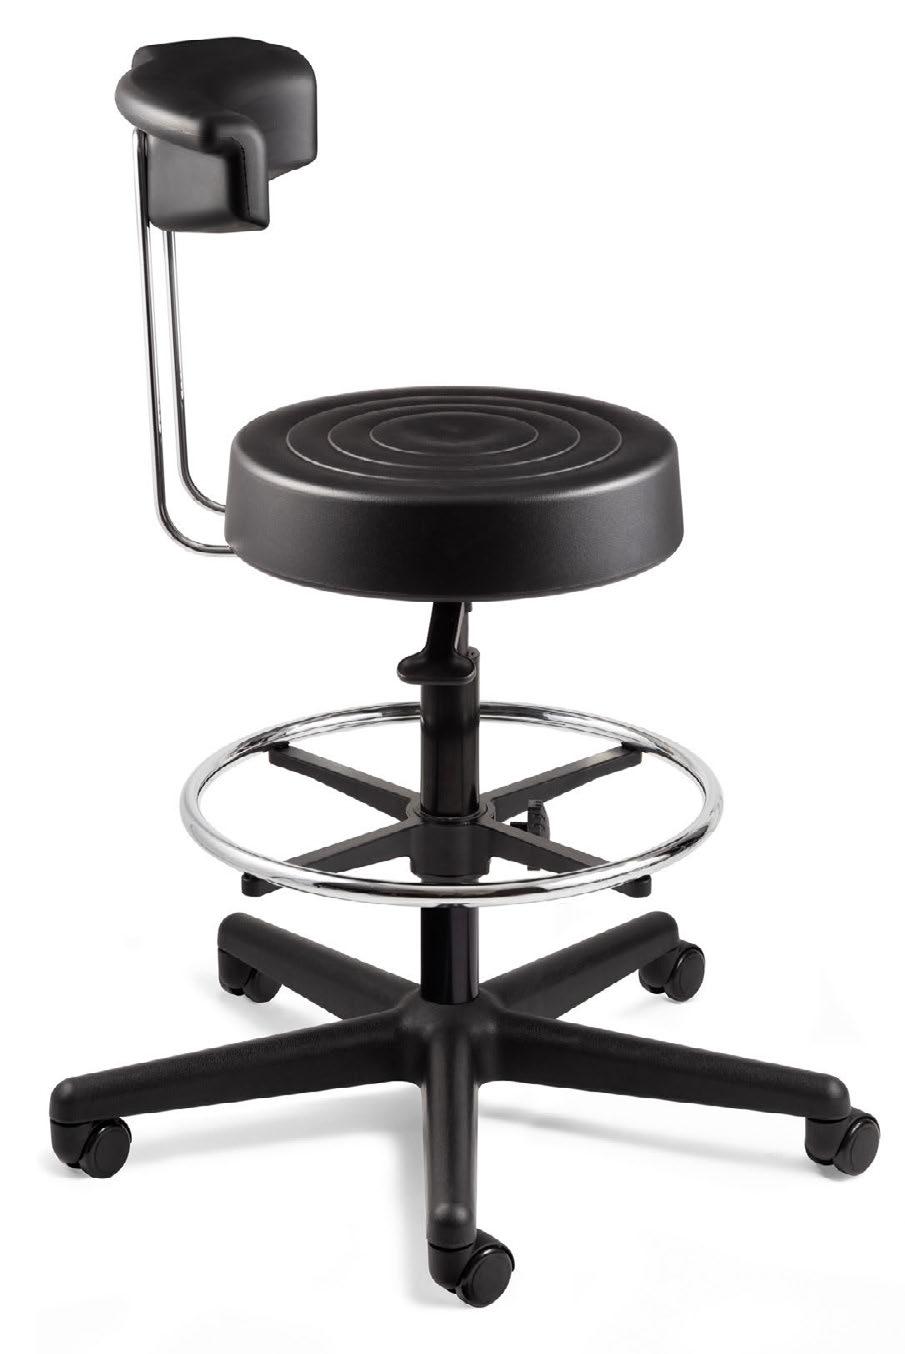 BACKLESS STOOLS J/S3000 Series ERGOLUX SERIES Experience extreme stress-relief with the BEVCO ERGOLUX backless stools.